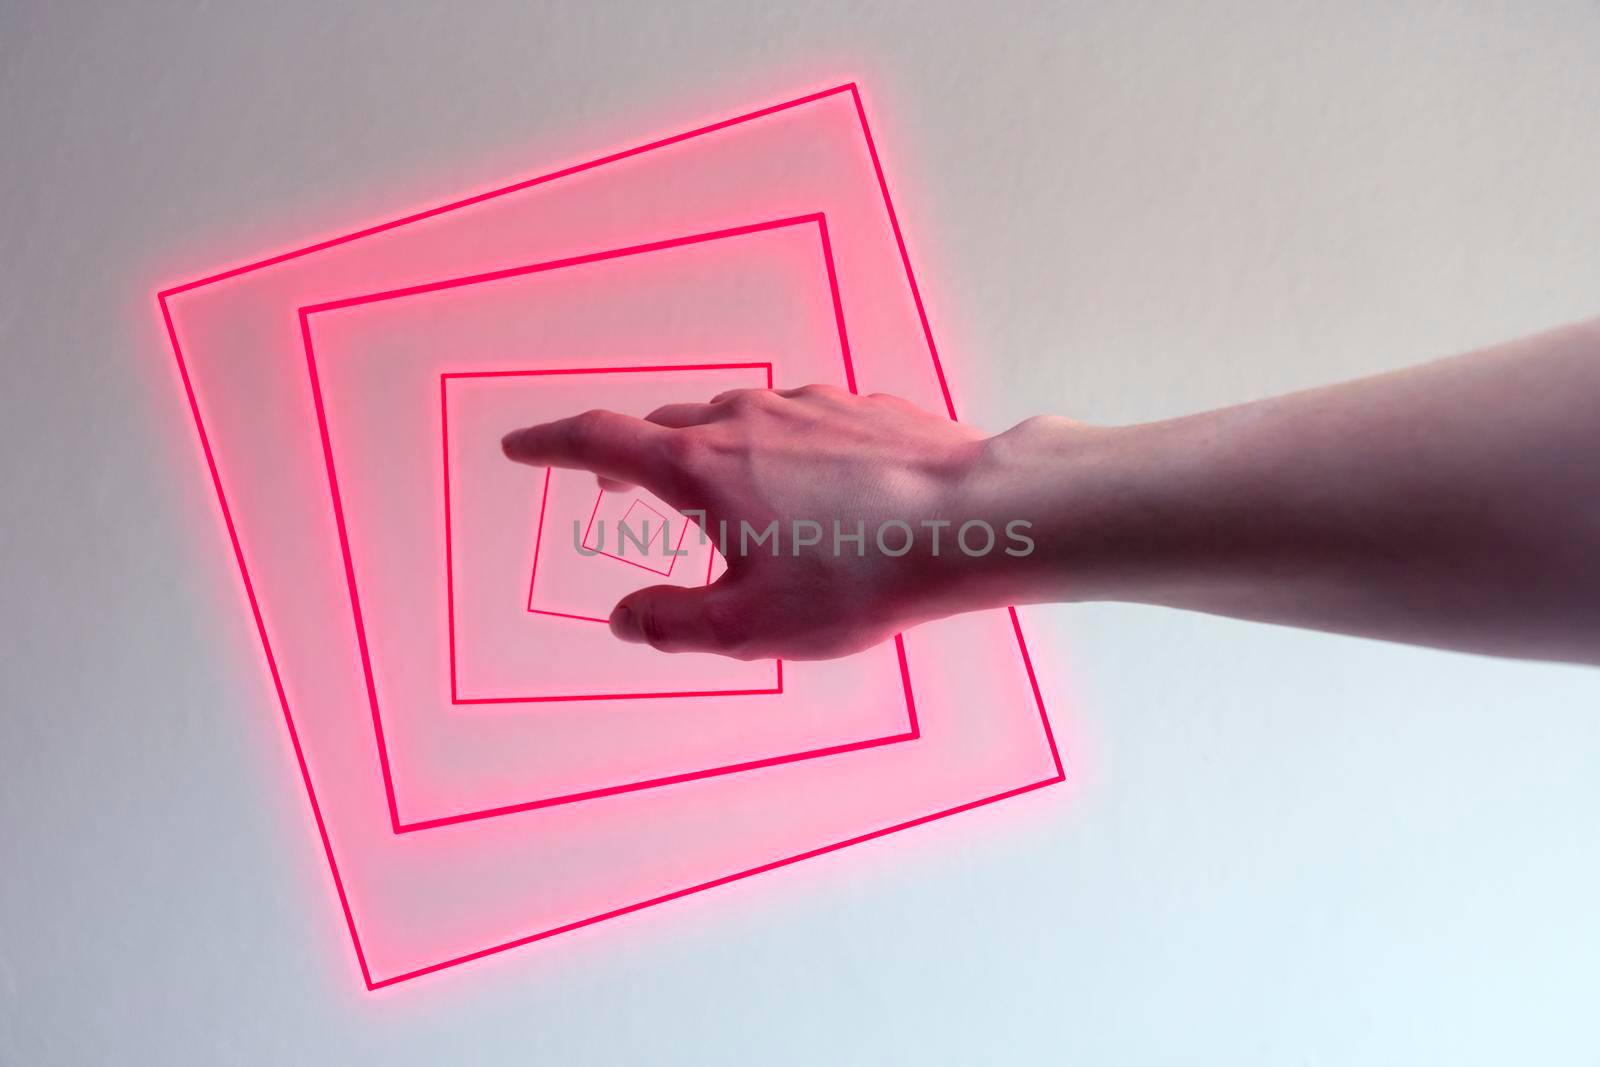 Hand entering in a neon light as a gate for new dimensions. Concept of new contemporary technology like metaverse, augmented reality and artificial intelligence.